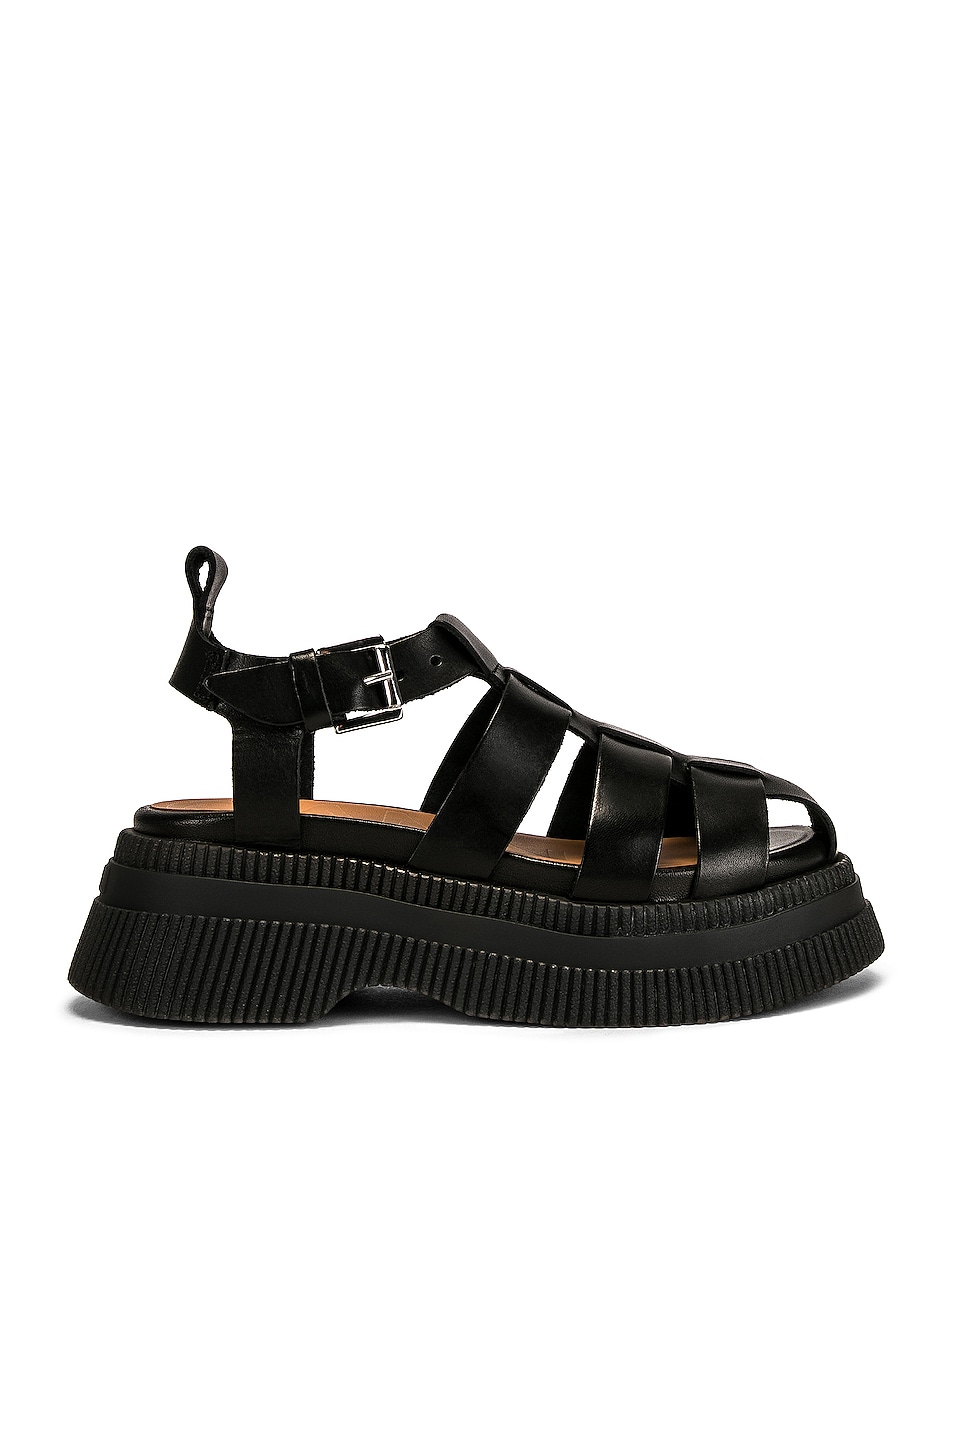 Image 1 of Ganni Creepers Sandal in Black